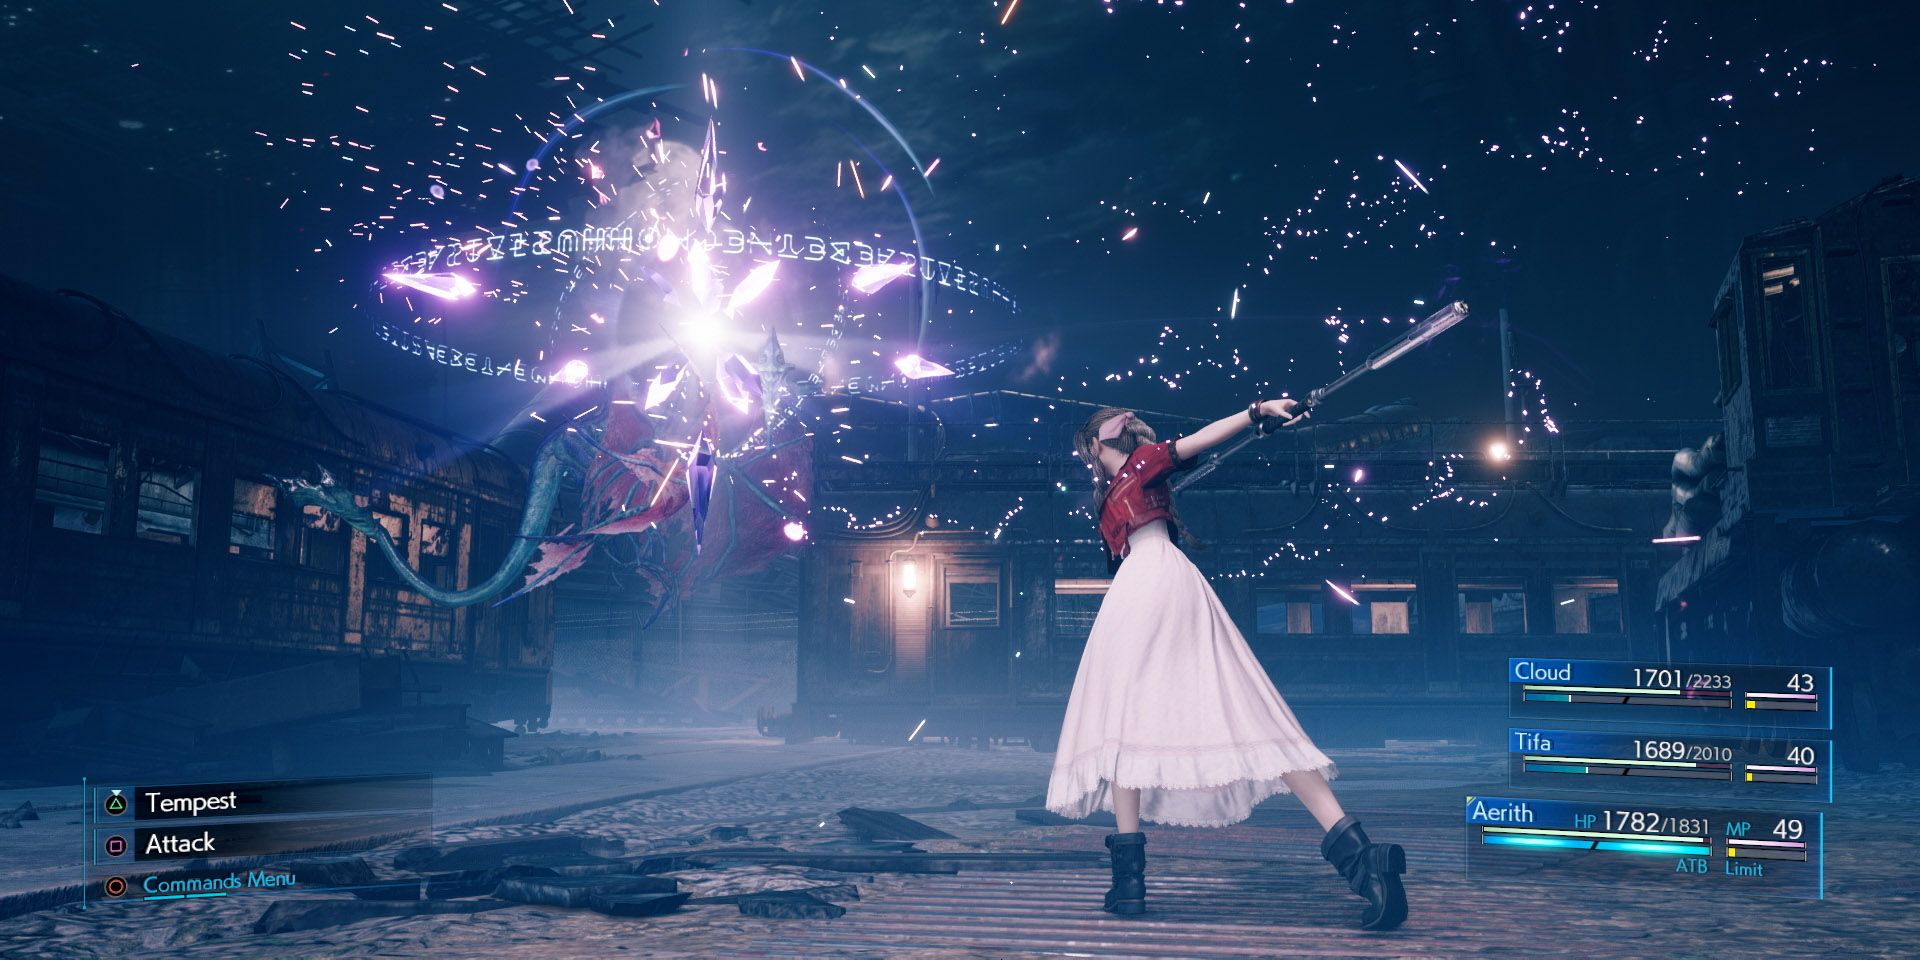 Aerith using a spell on an enemy